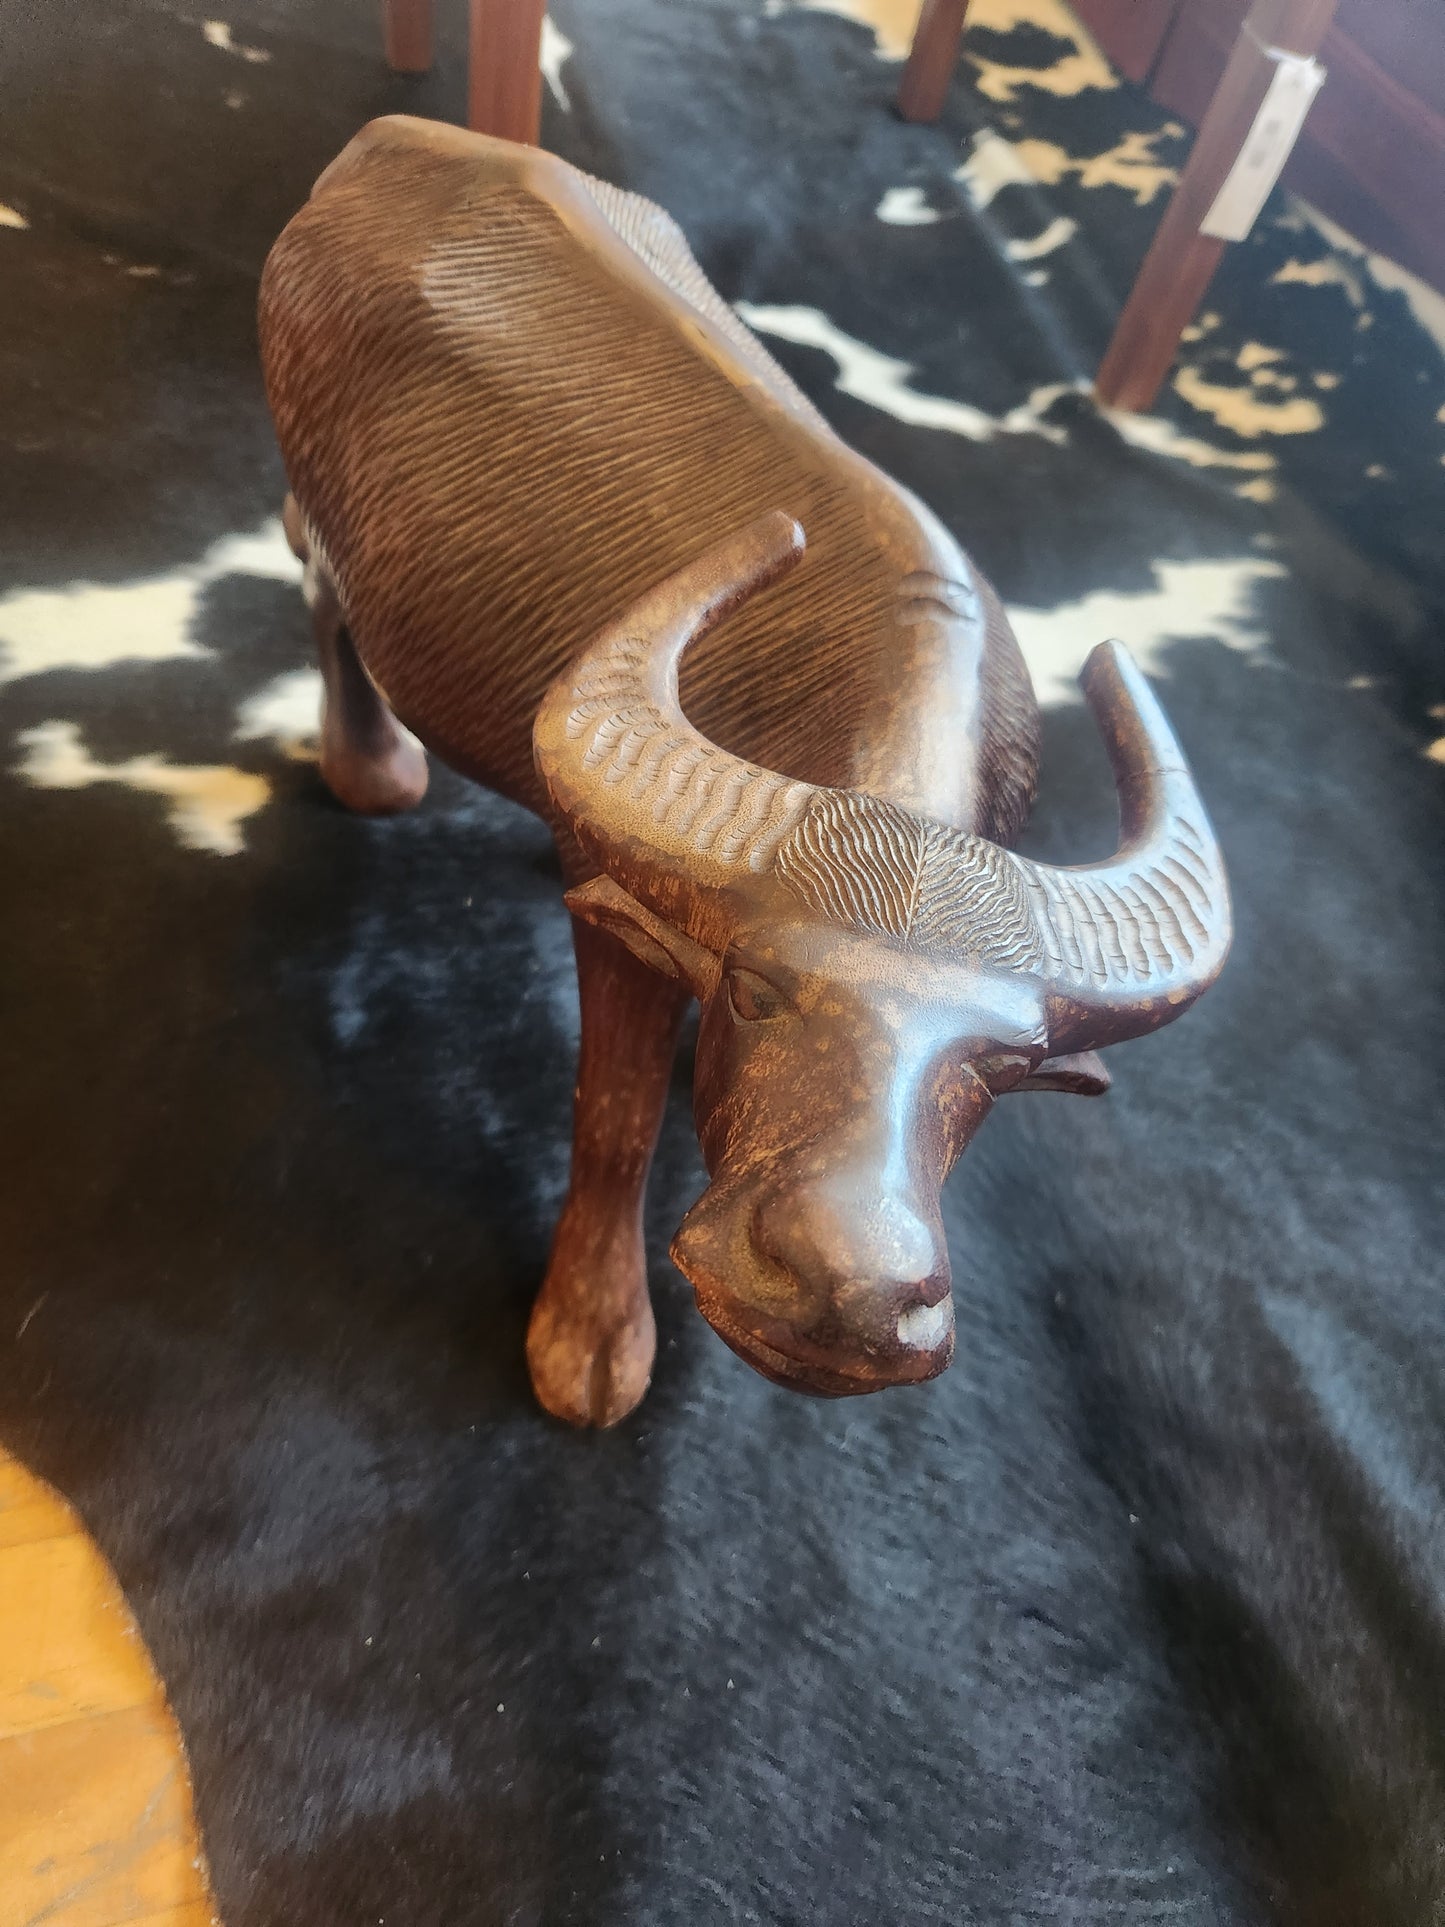 Wood Carved Water Buffalo